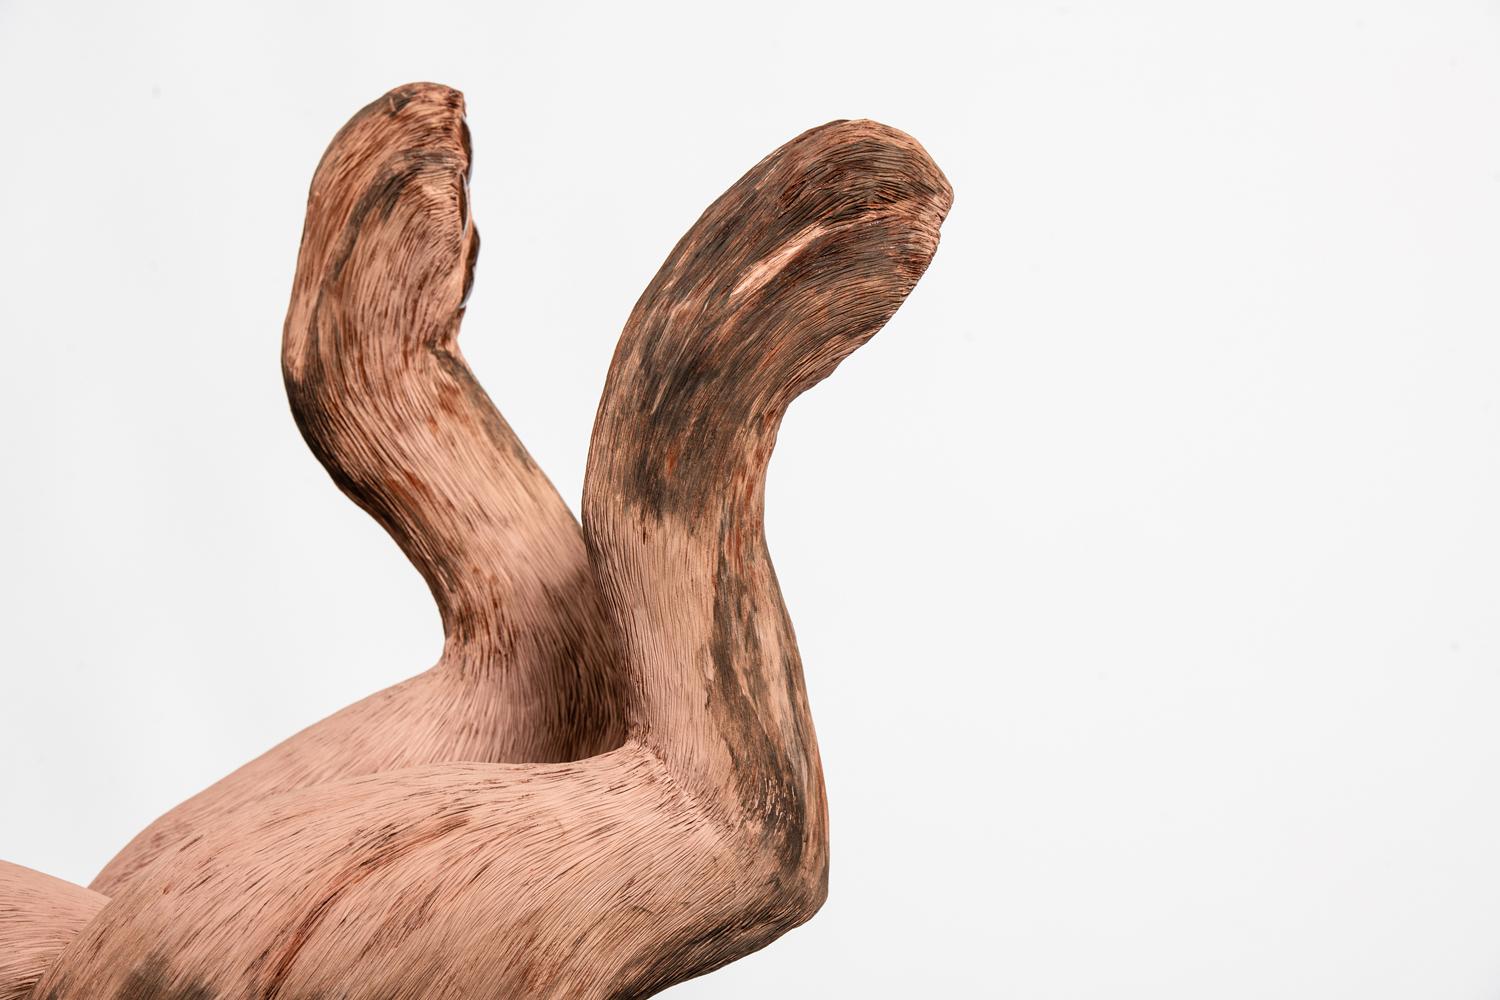 Margit Brundin, Swedish, (b. 1981, Ängelholm, Sweden)

A collection of works by Swedish ceramic artist Margit Brundin, of human-scale hares created for this exhibition, 